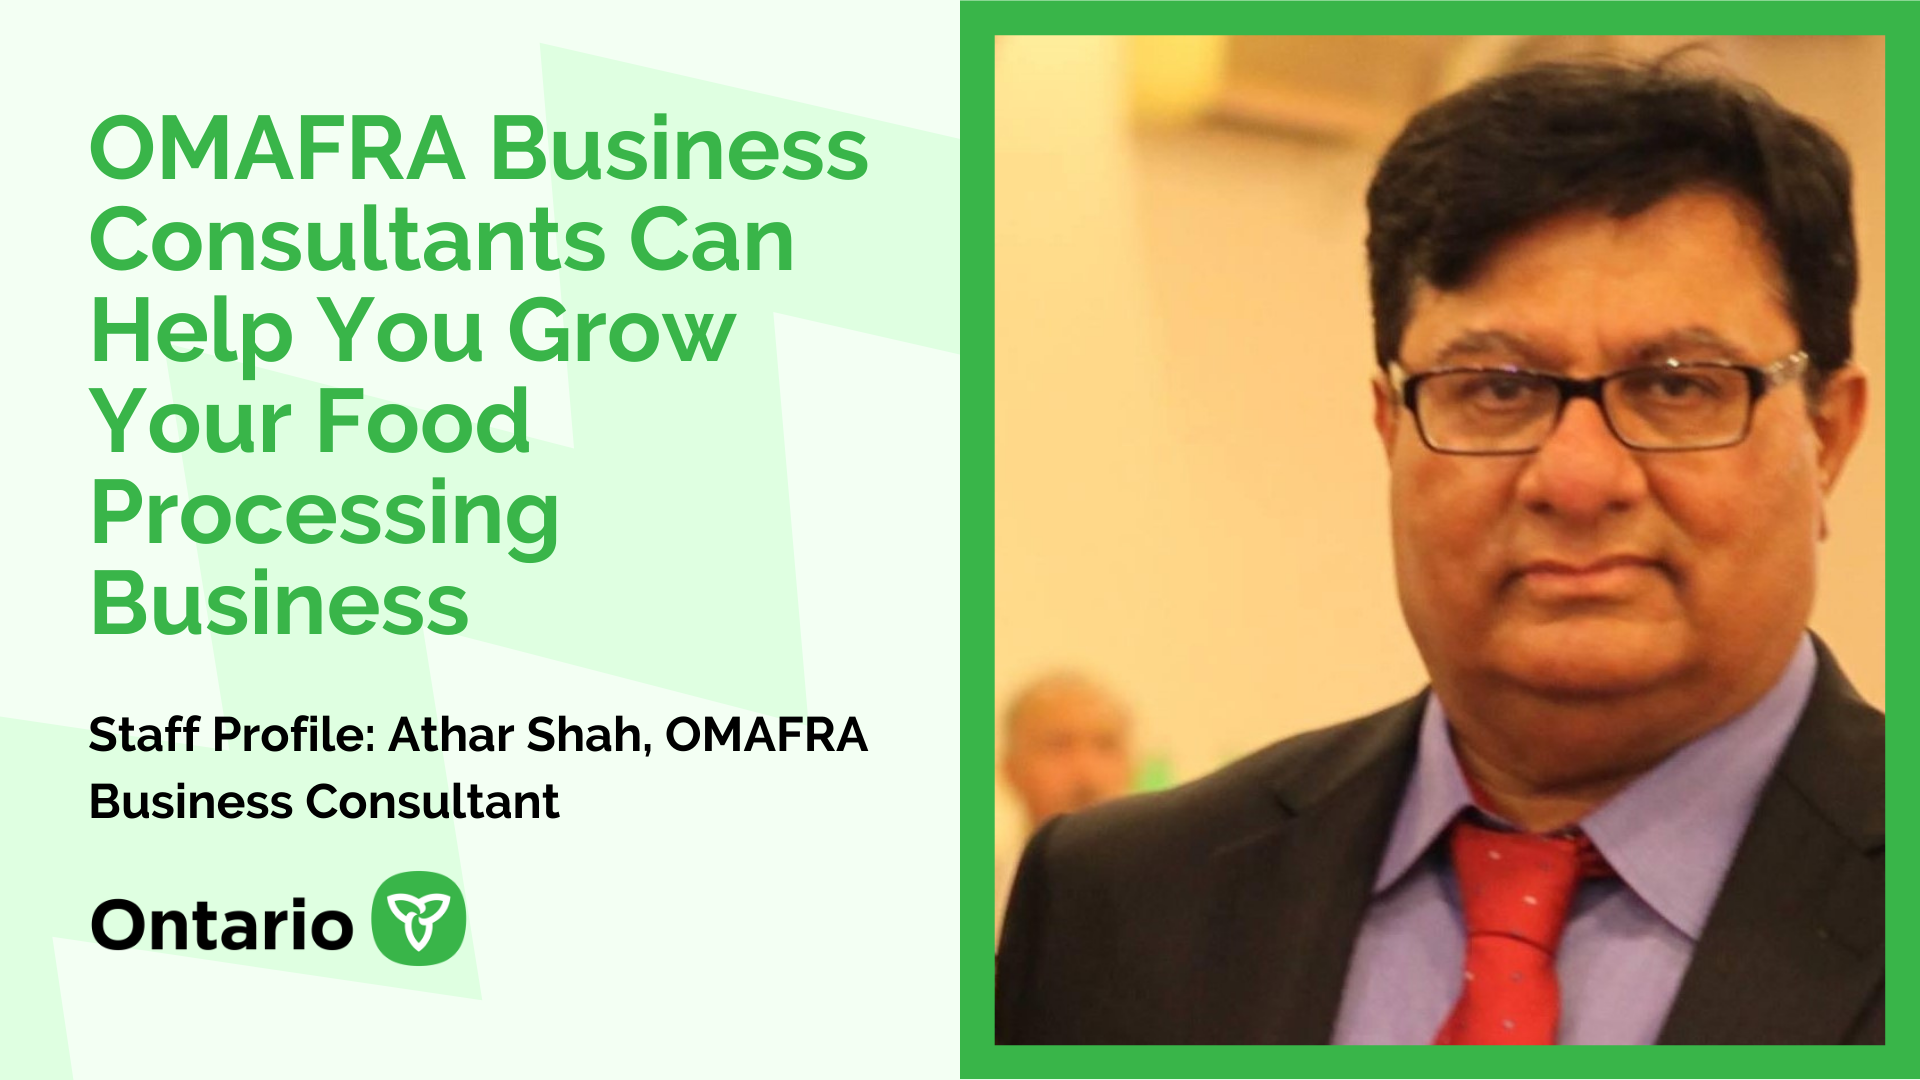 OMAFRA Business Consultants Can Help You Grow Your Food Processing Business